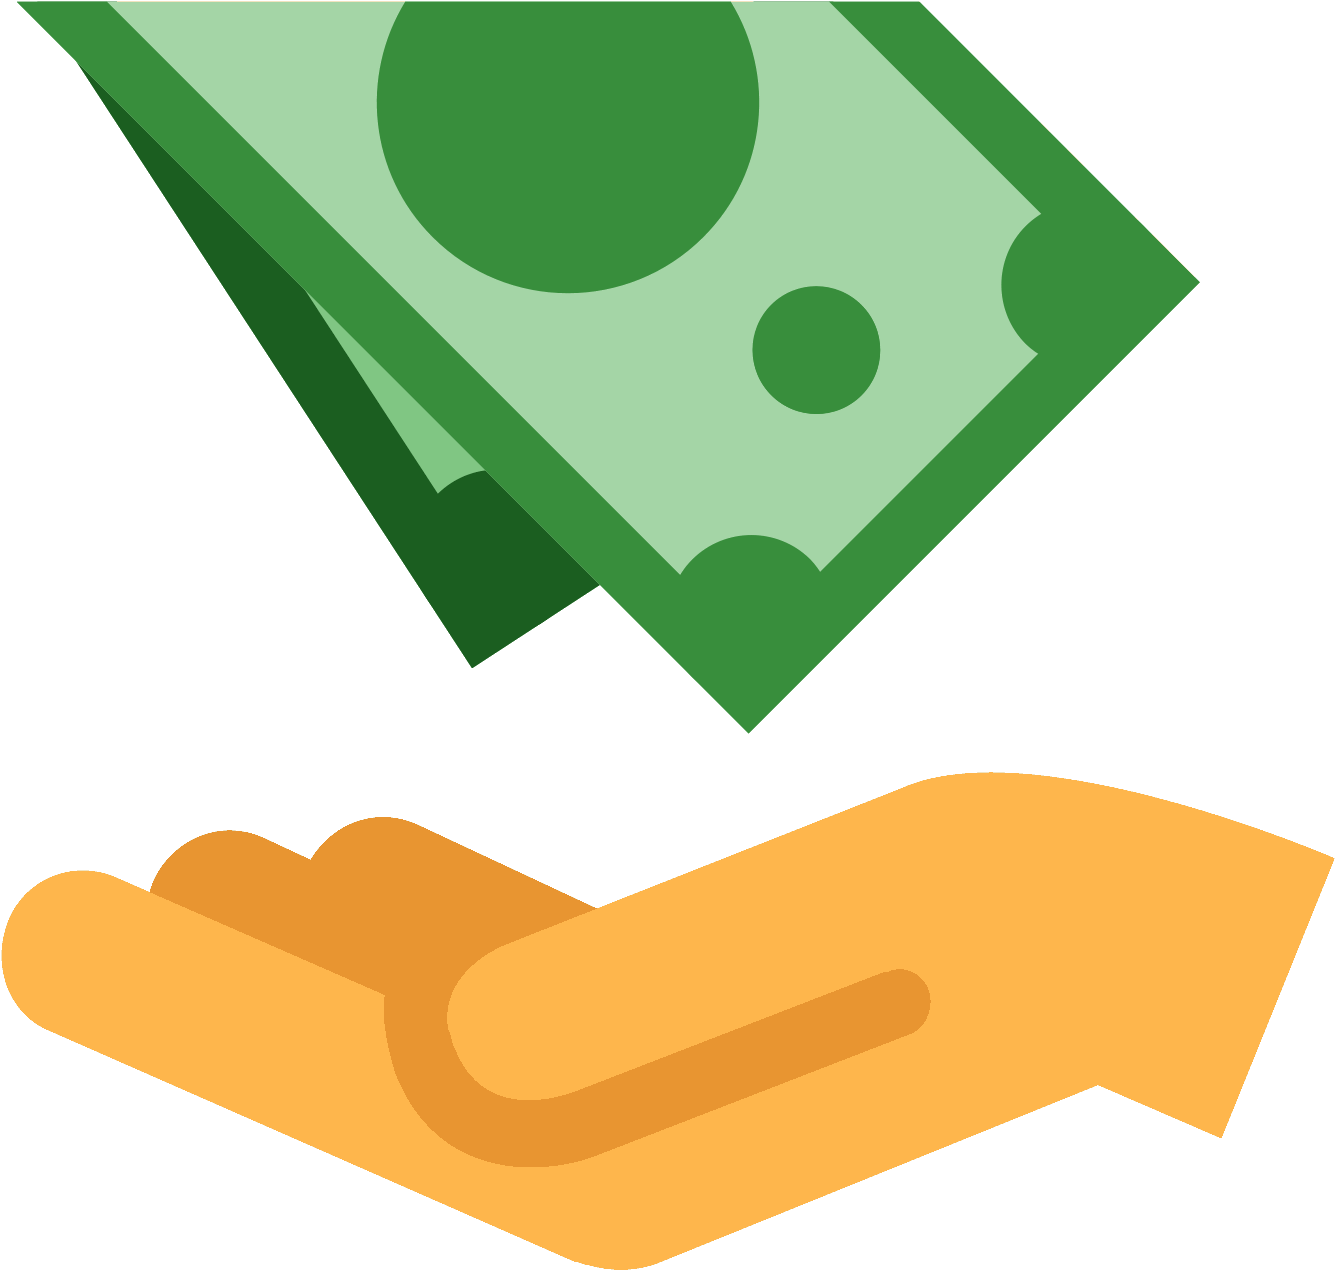 It's A Logo Of A Hand On The Bottom With Money Falling - Refund Icon (1600x1600)